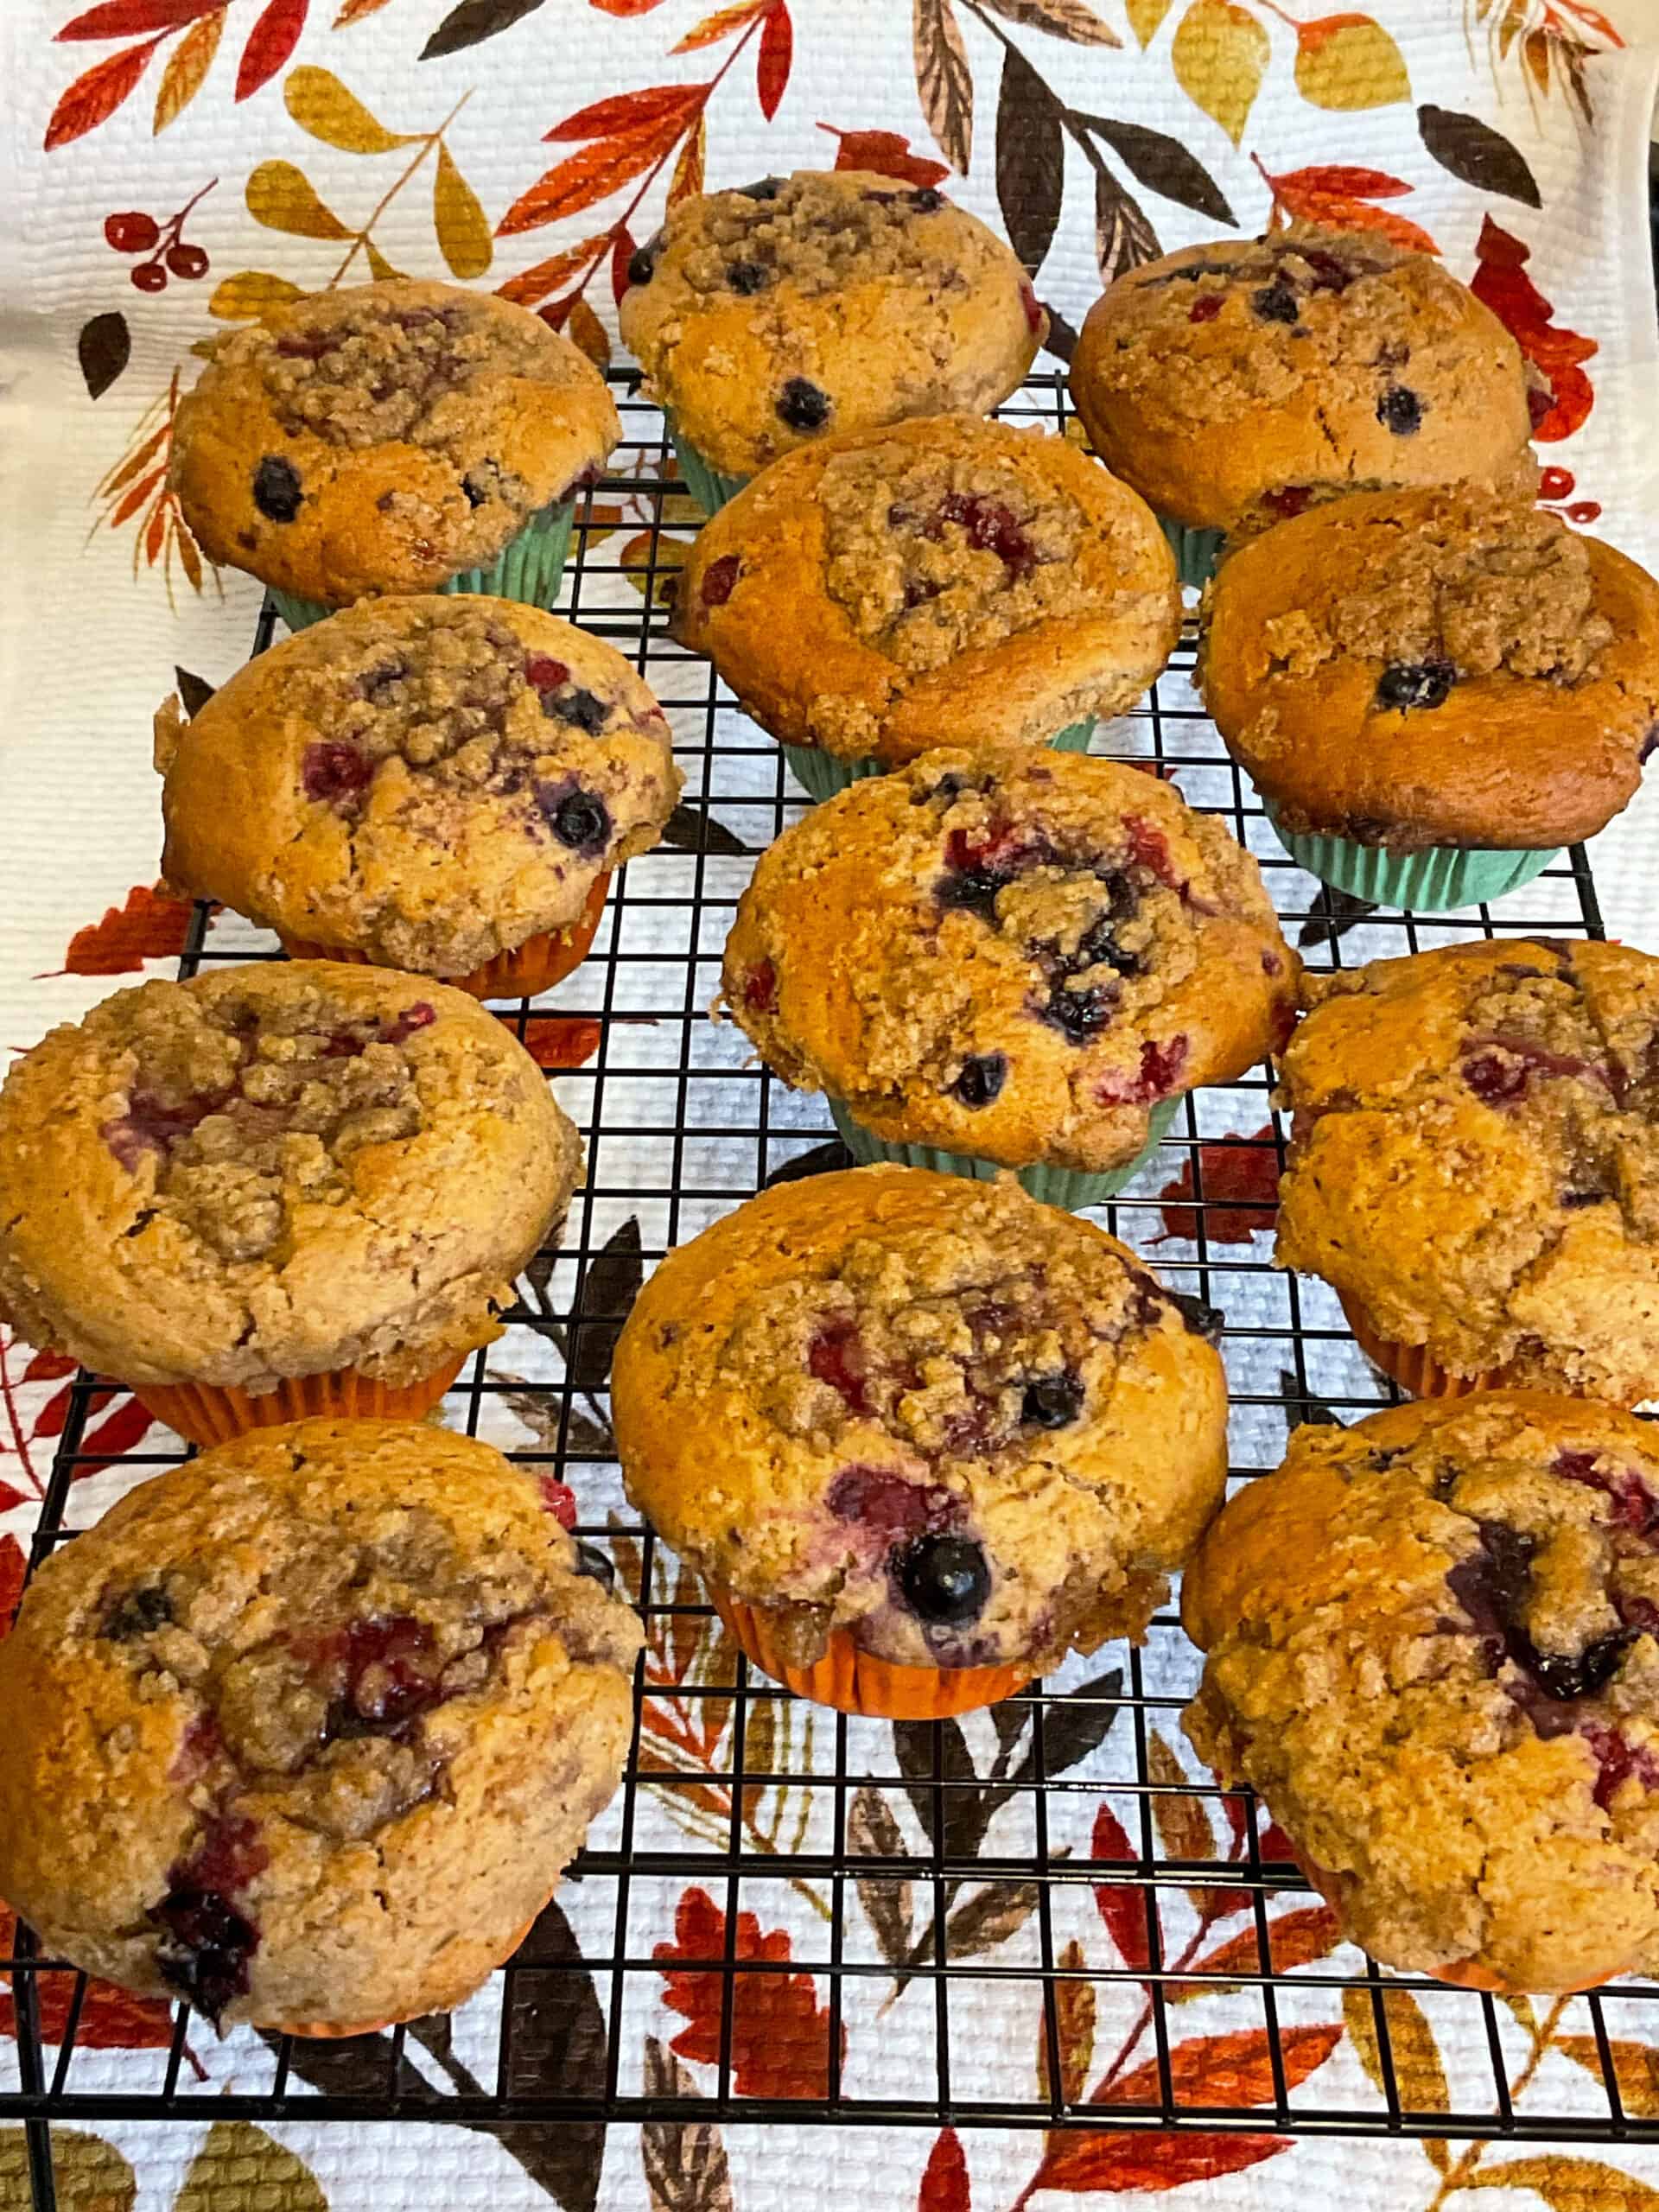 Mixed berry muffins cooling on wire rack.